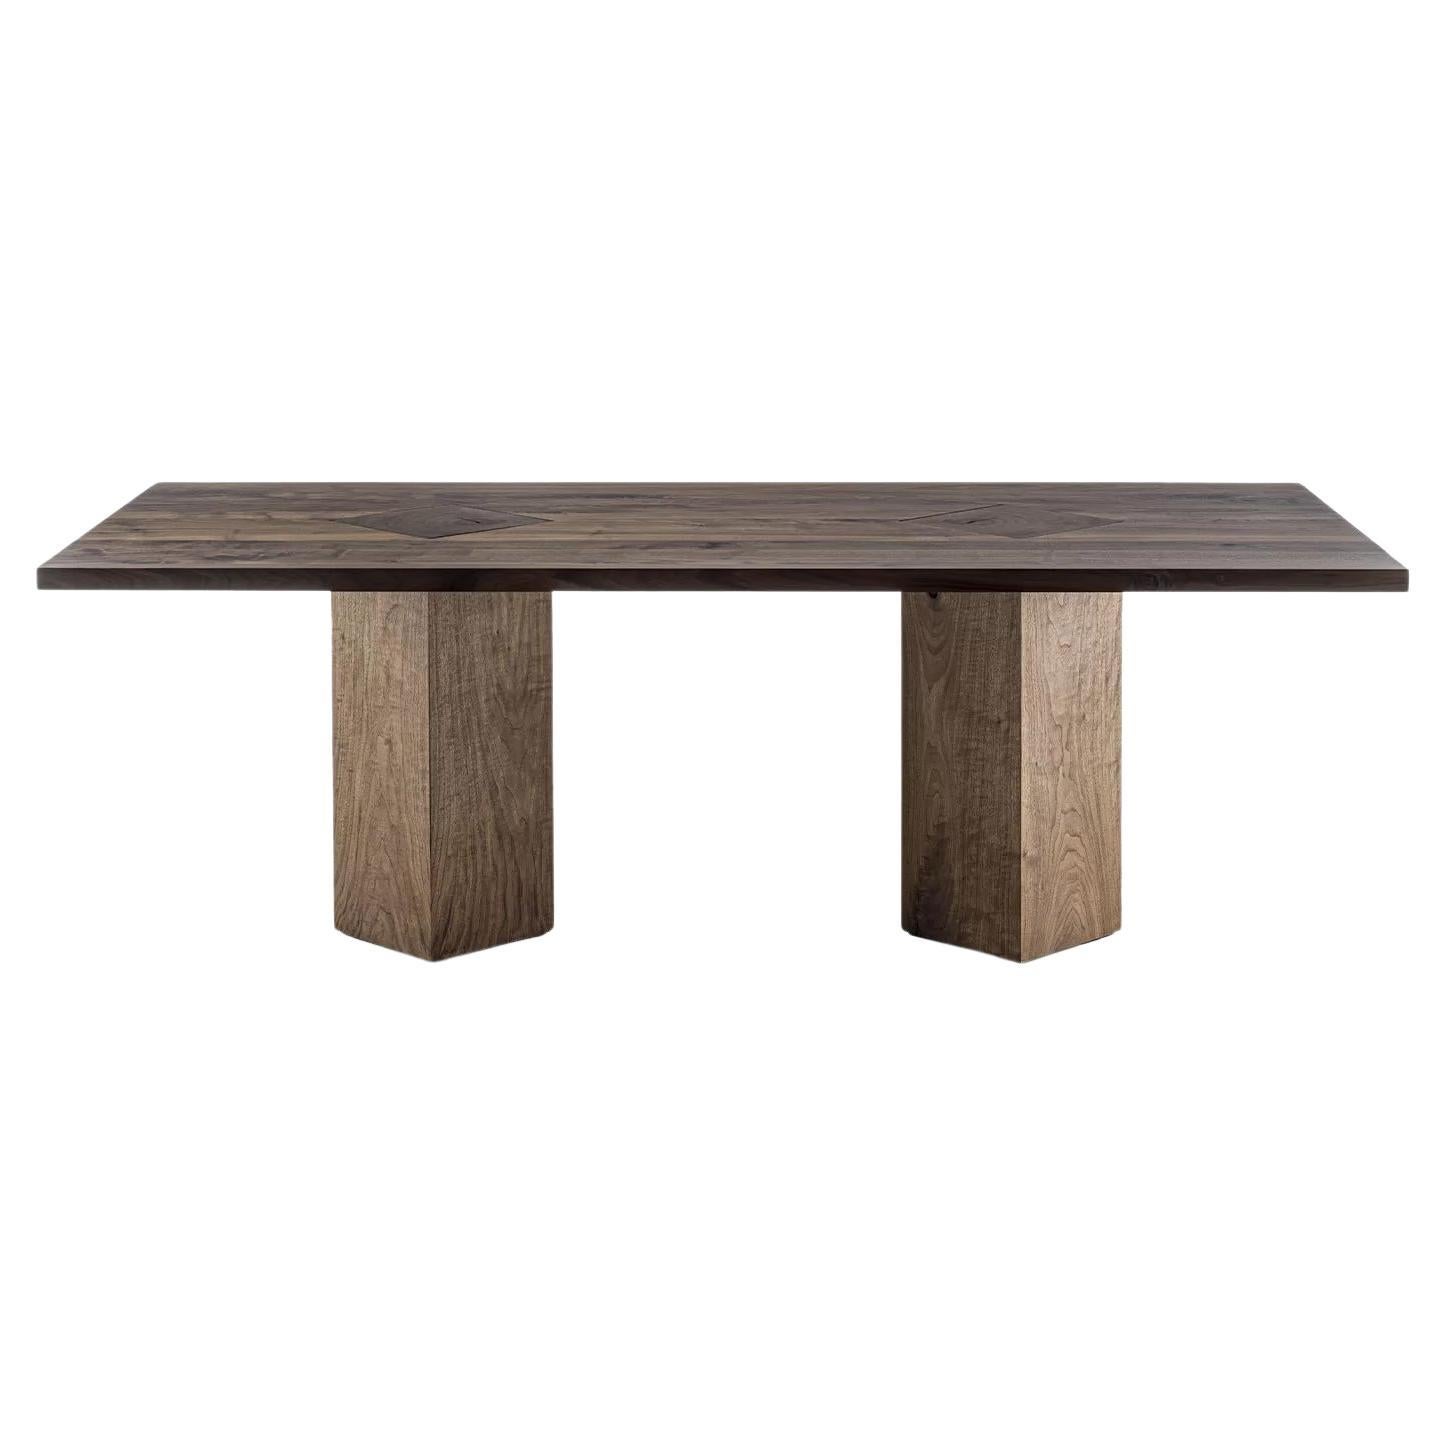 Junior B Solid Wood Dining Table, Designed by Authentic Design, Made in Italy 